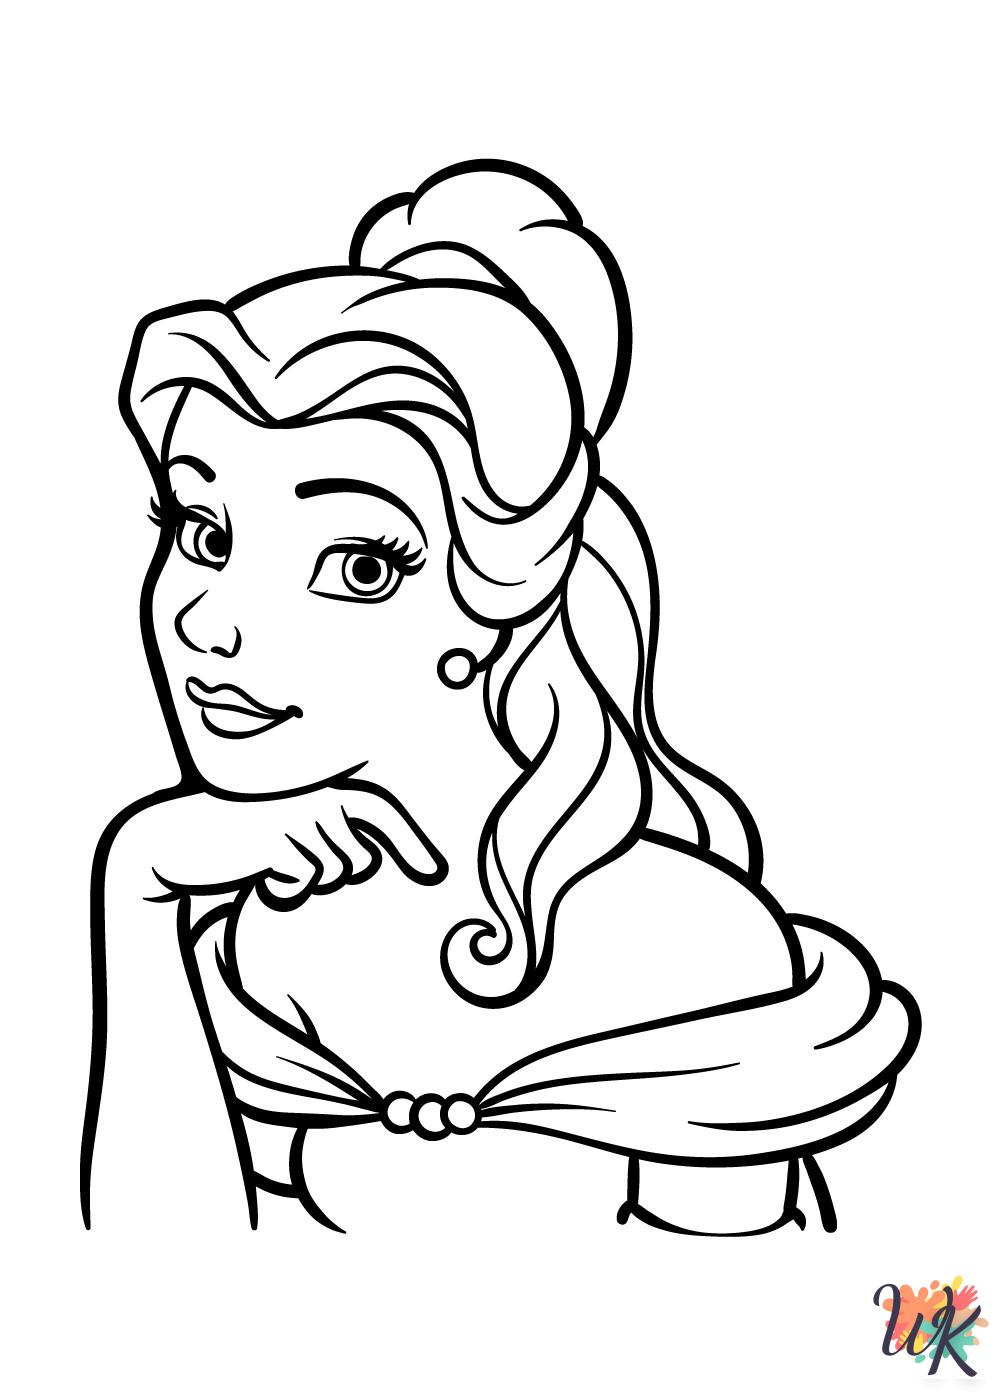 Belle ornaments coloring pages